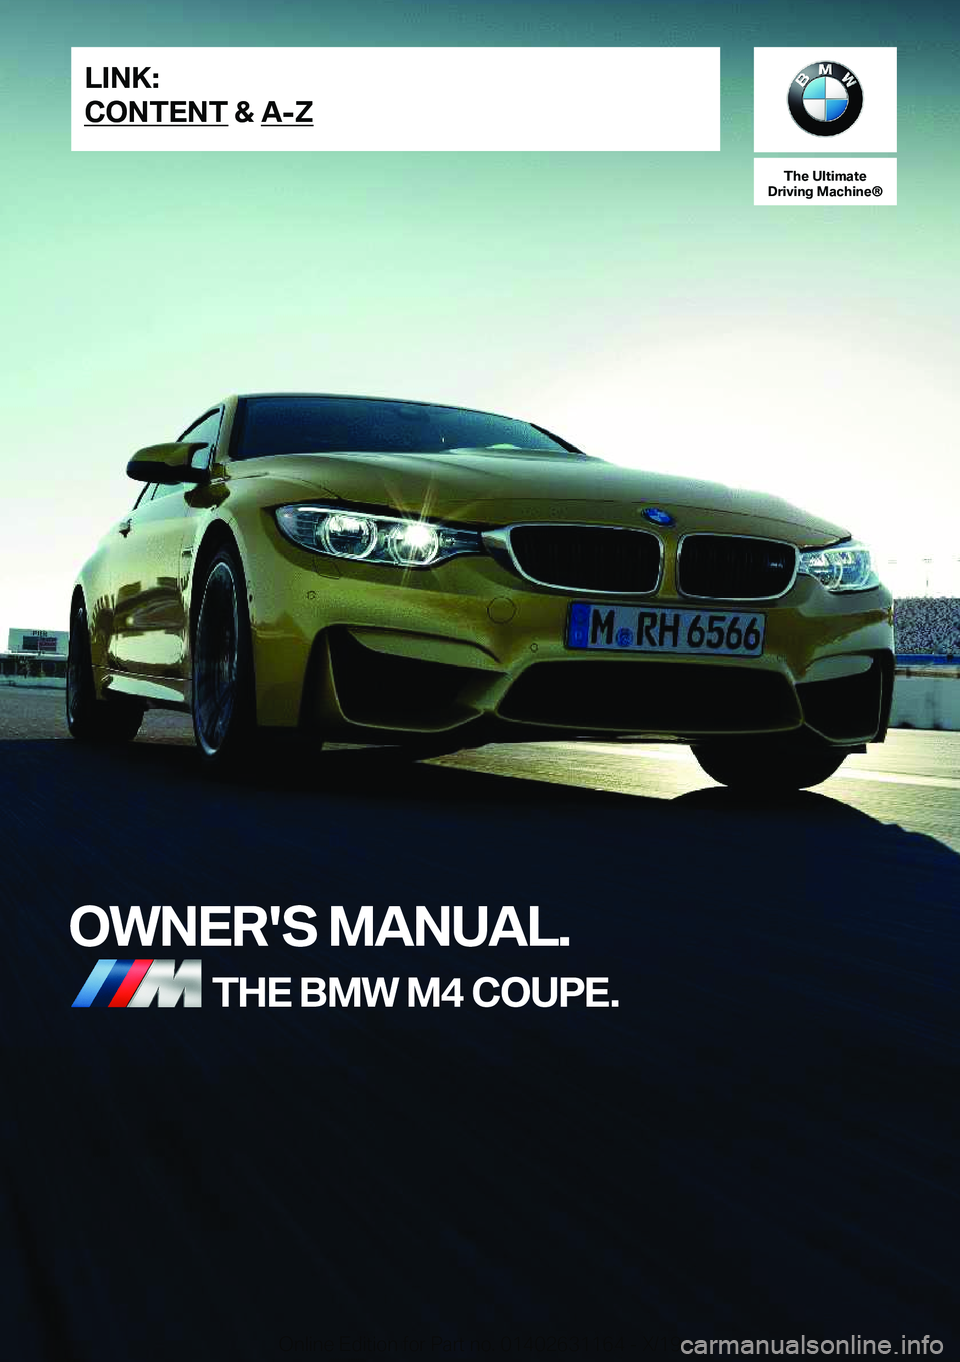 BMW M4 2020  Owners Manual �T�h�e��U�l�t�i�m�a�t�e
�D�r�i�v�i�n�g��M�a�c�h�i�n�e�n
�O�W�N�E�R�'�S��M�A�N�U�A�L�.�T�H�E��B�M�W��M�4��C�O�U�P�E�.�L�I�N�K�:
�C�O�N�T�E�N�T��&��A�-�Z�O�n�l�i�n�e��E�d�i�t�i�o�n��f�o�r�